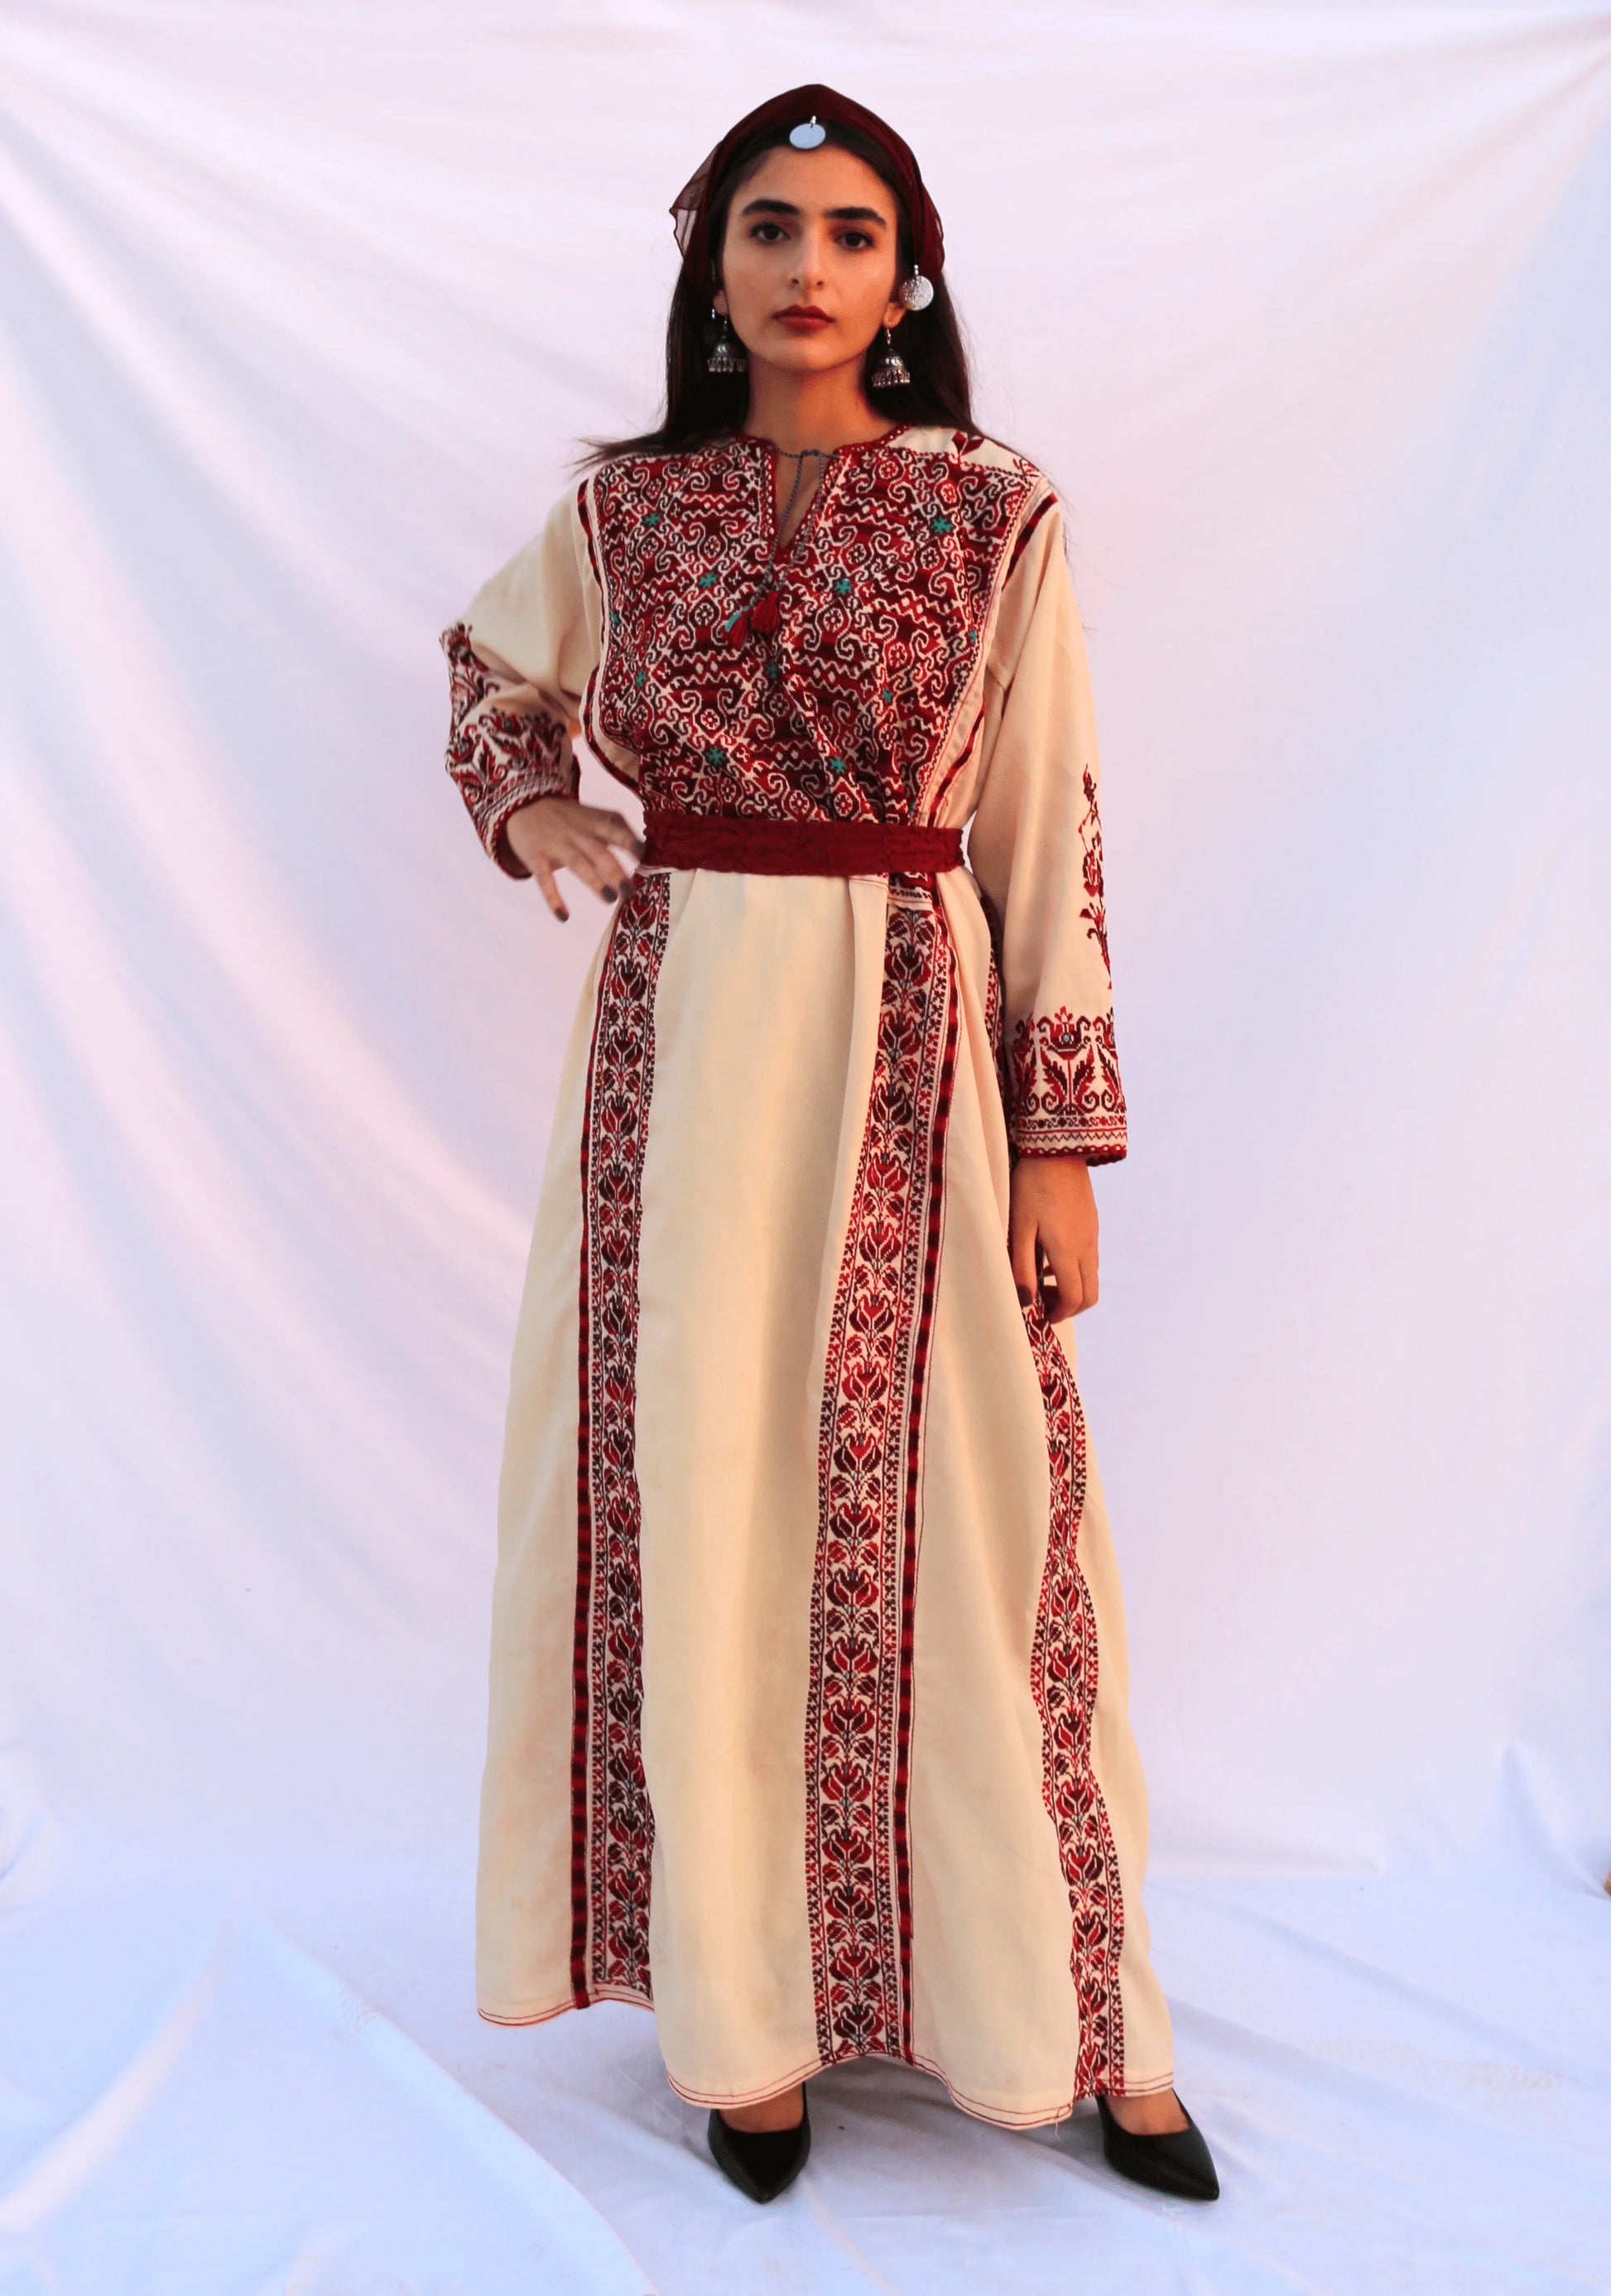 The Traditional Clothing of Palestine